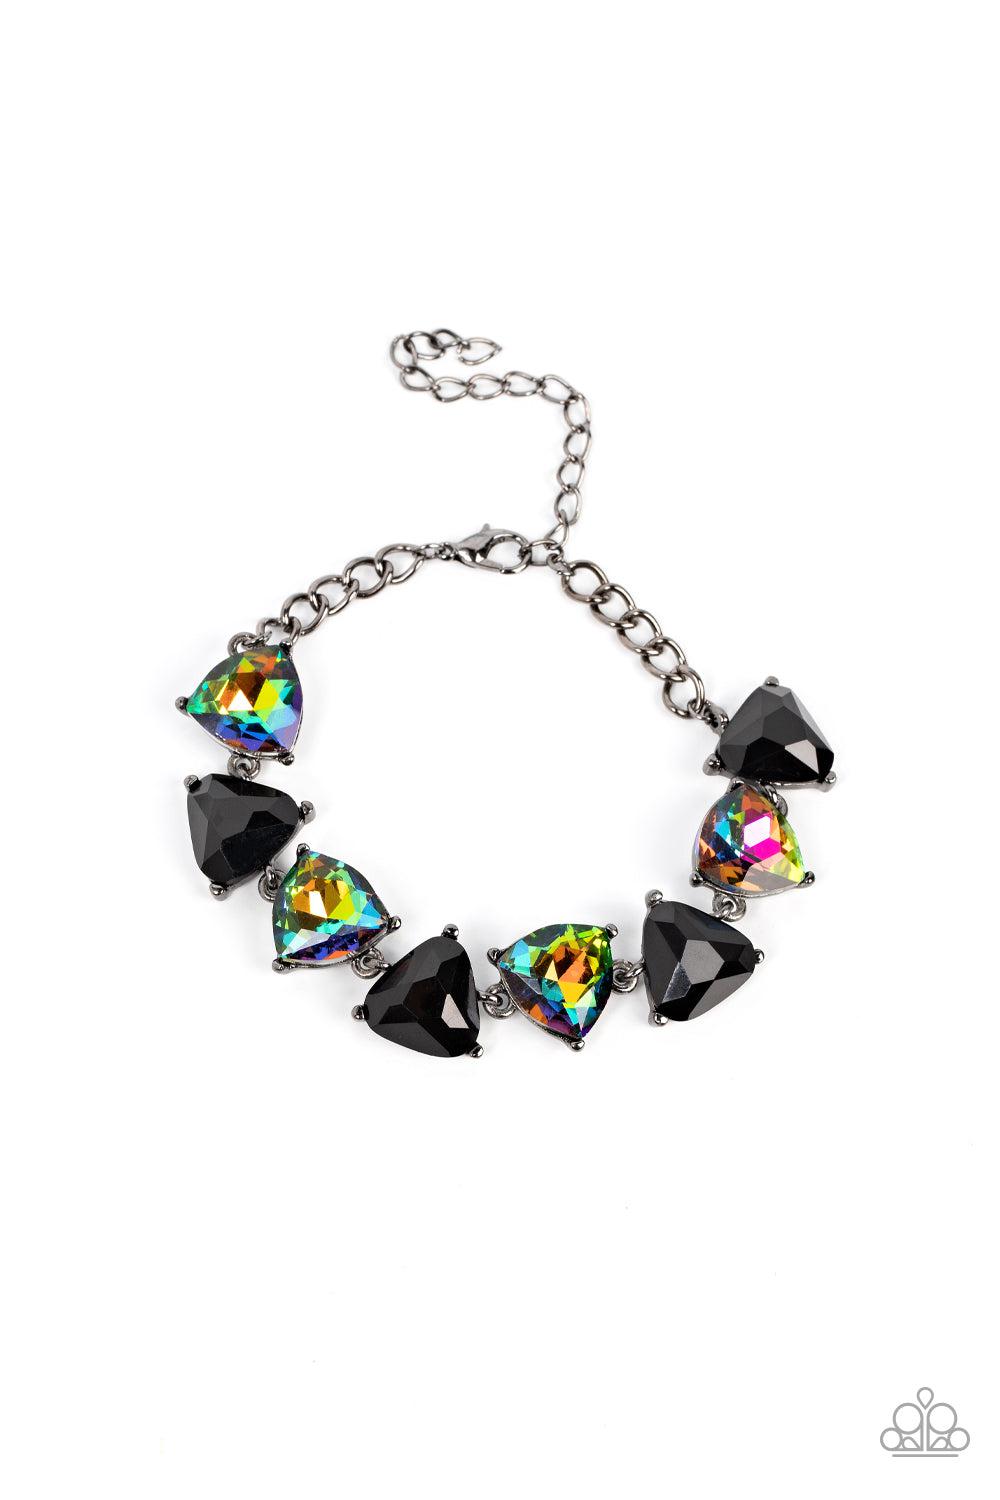 Pumped up Prisms Multi Oil Spill Bracelet - Paparazzi Accessories- lightbox - CarasShop.com - $5 Jewelry by Cara Jewels